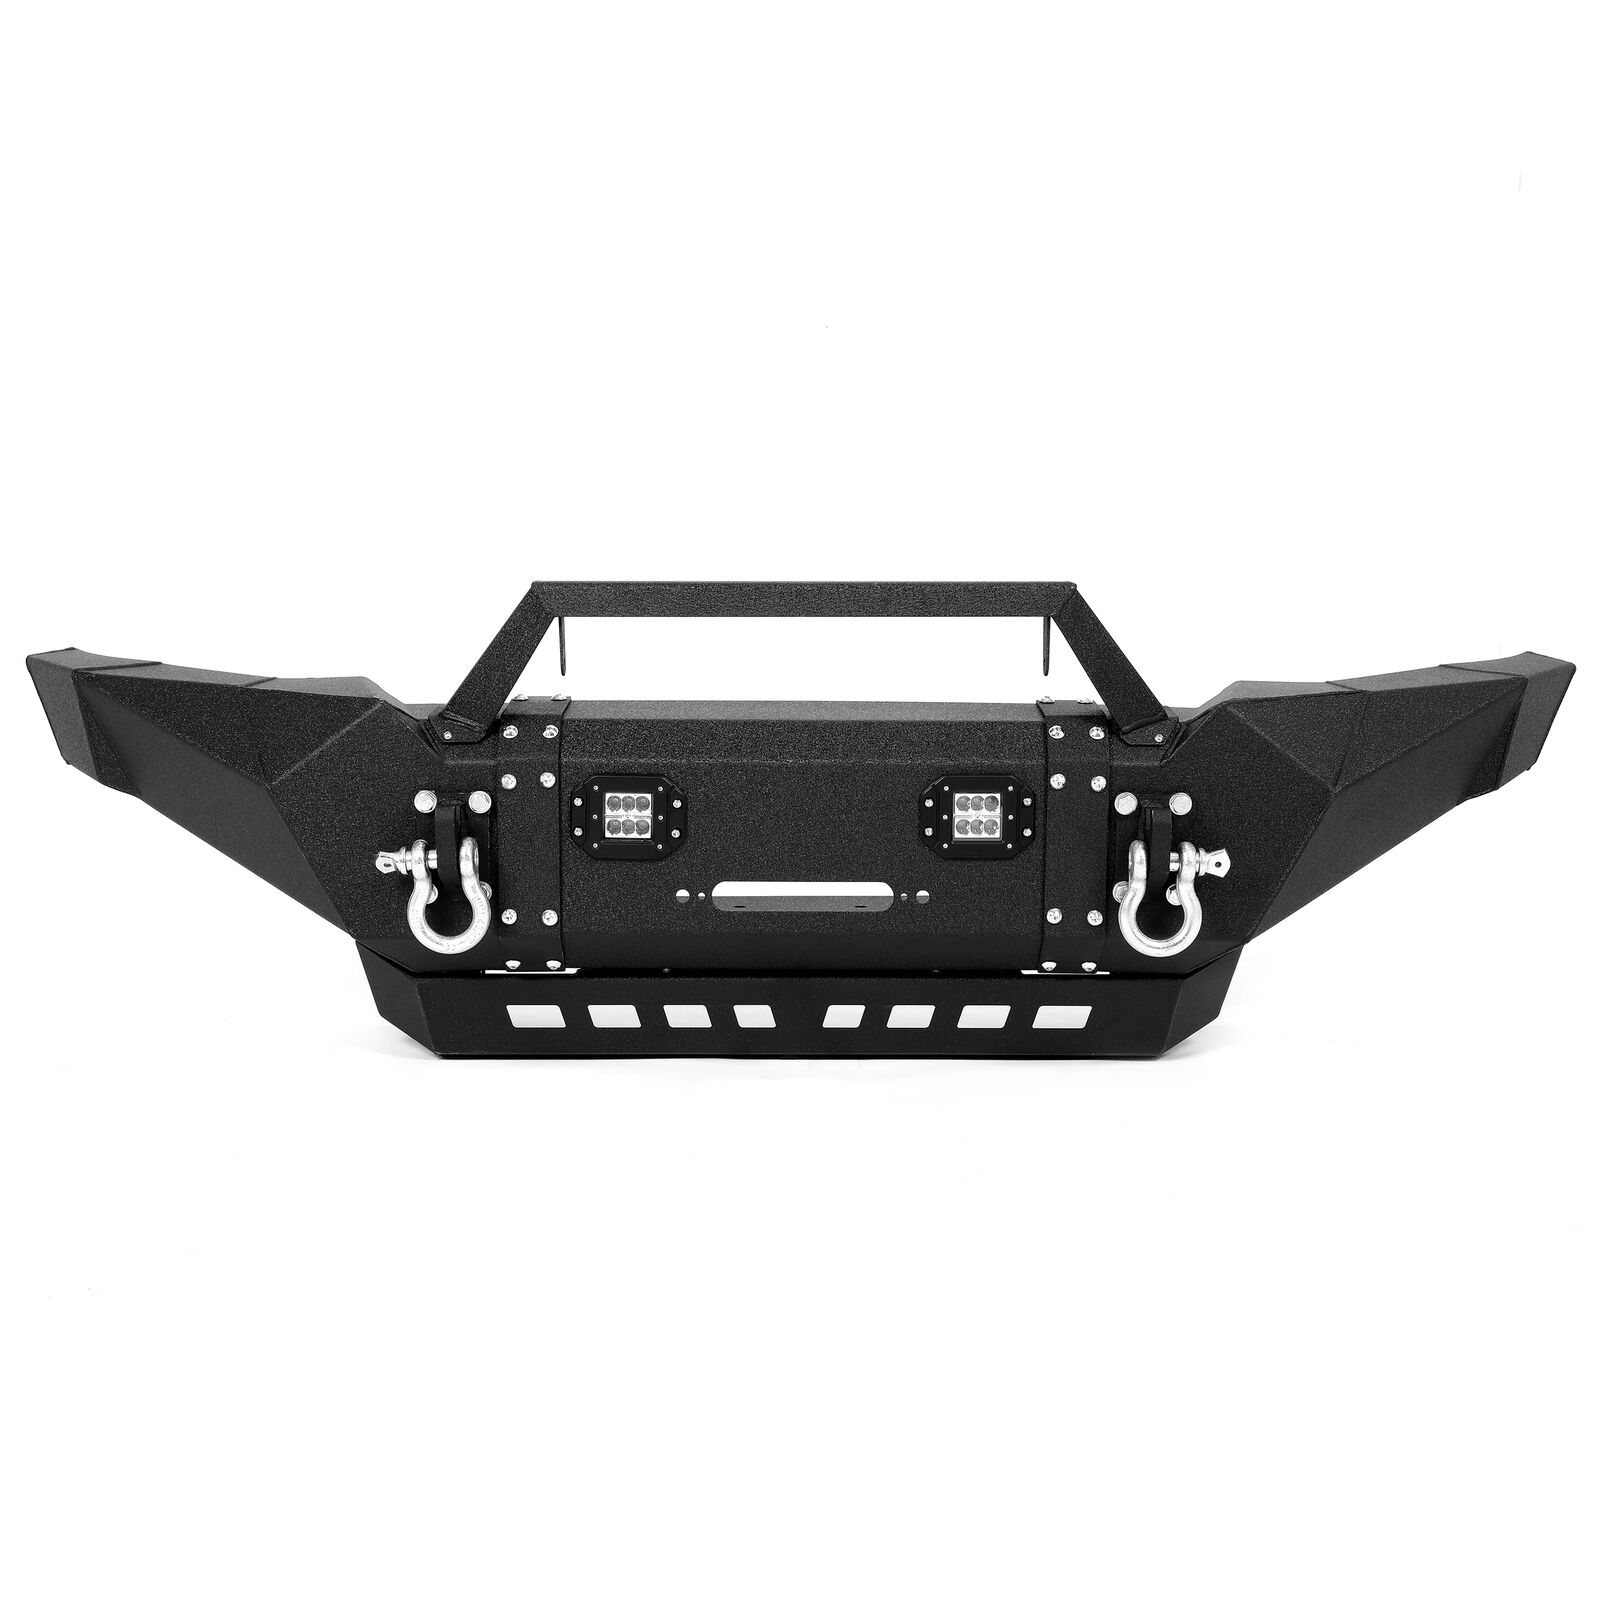 Front Bumper Pickup For Tacoma 2005-2015 w/ LED Lights + Winch Plate + D-Rings